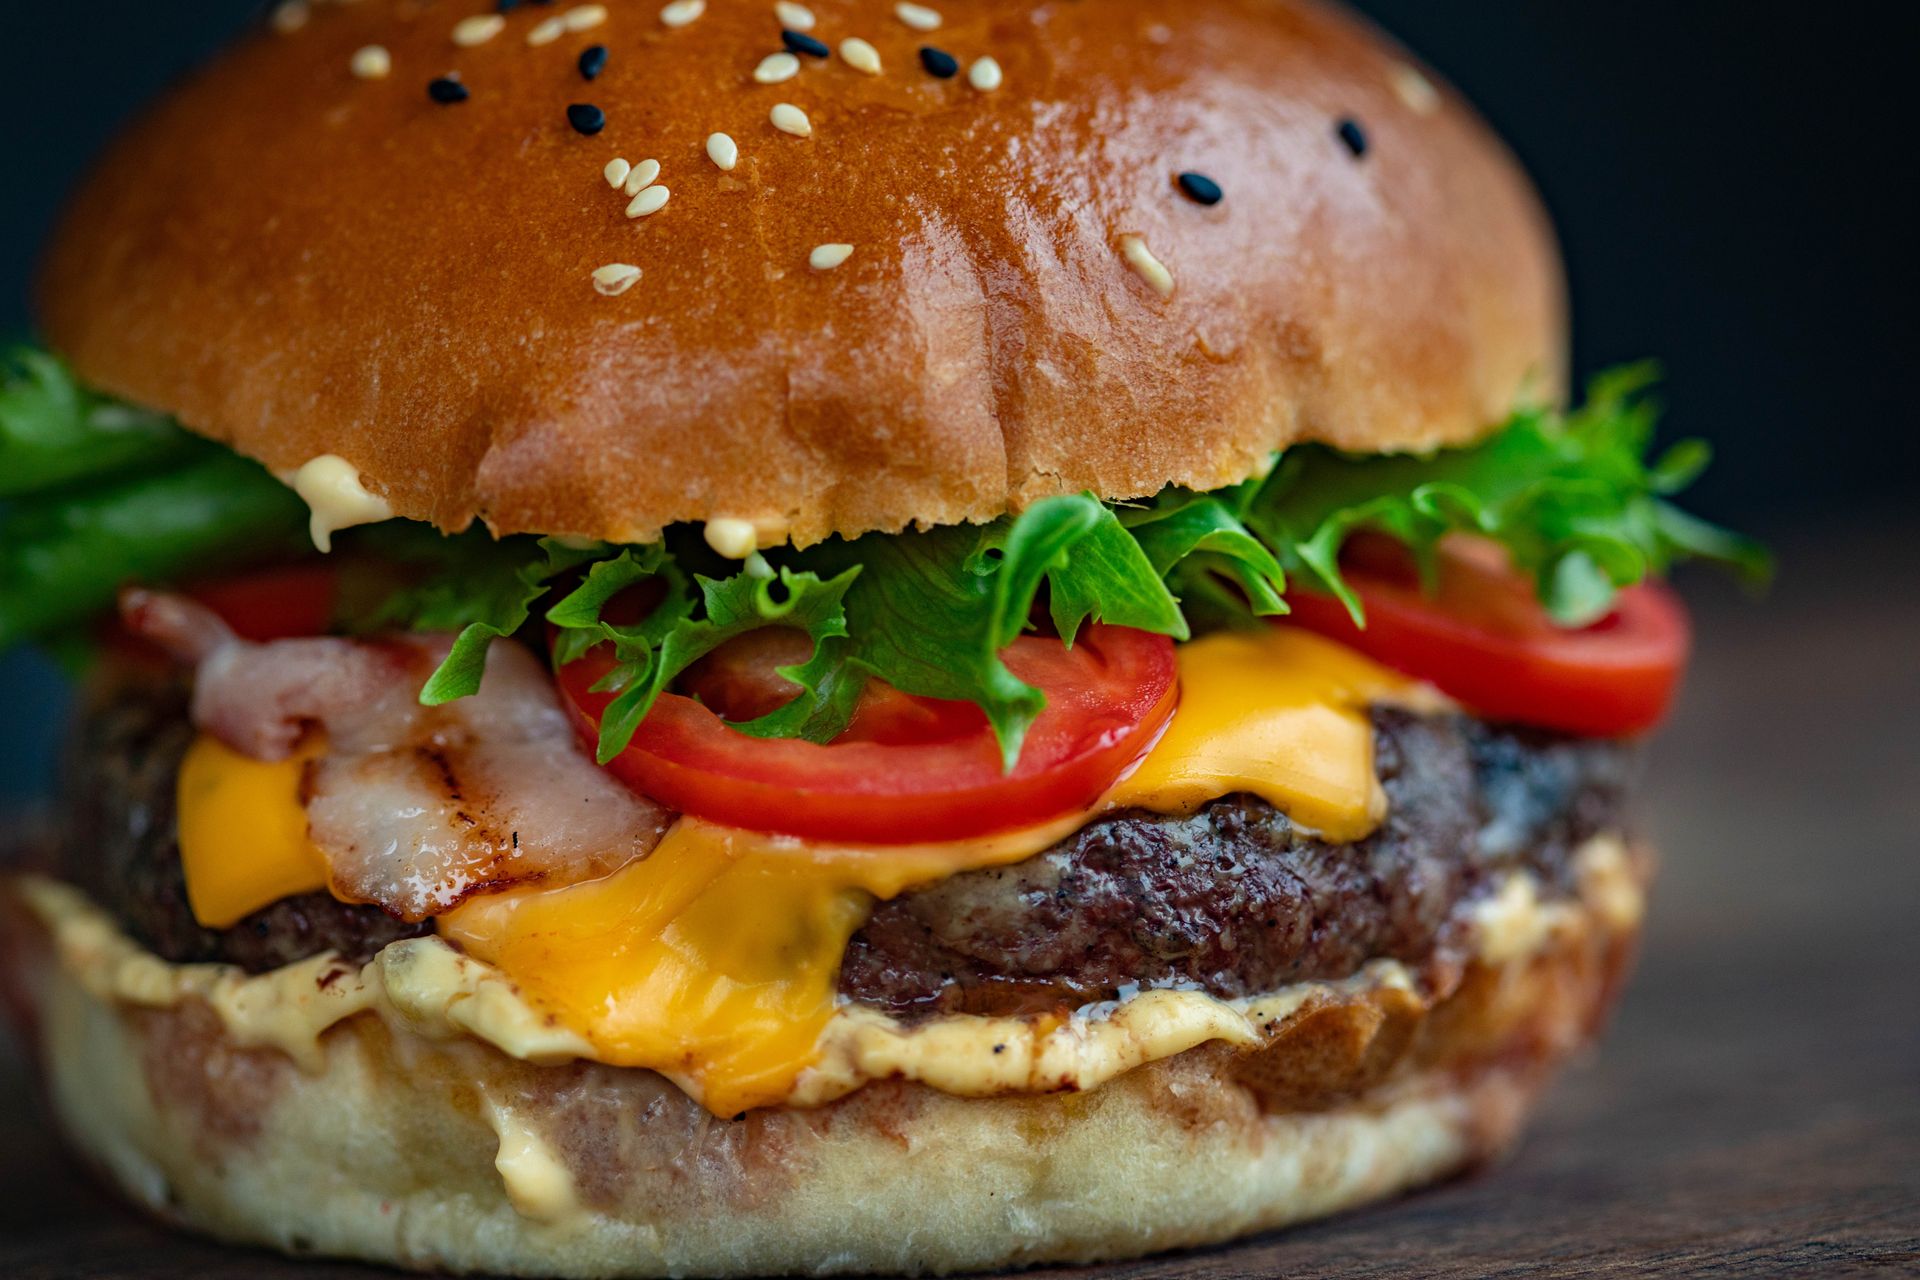 A close up of a hamburger with cheese , lettuce , tomatoes and bacon on a wooden table.